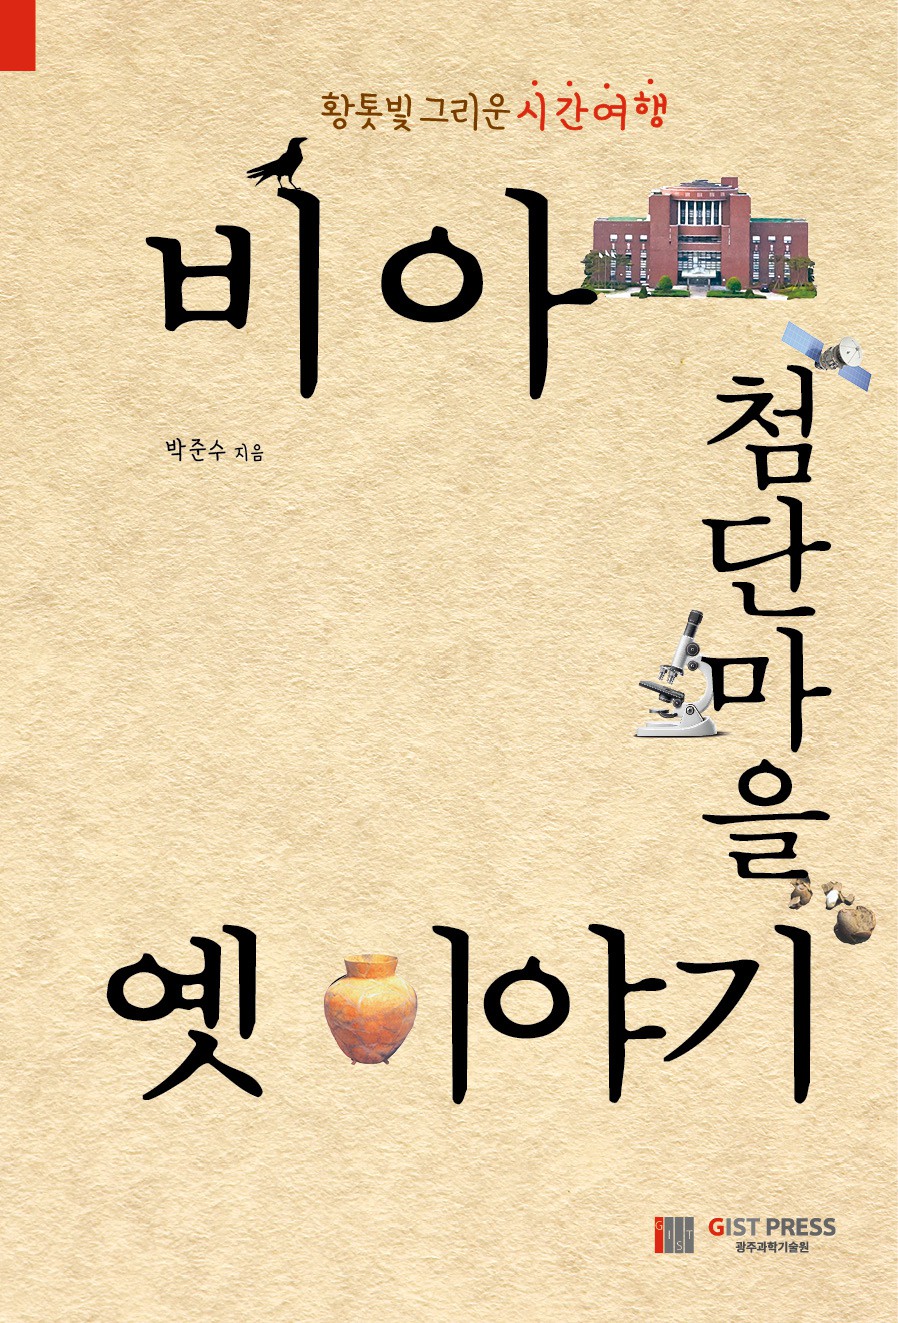 GIST PRESS publishes 'The Old Story of a High-Tech Village in Bia' 이미지